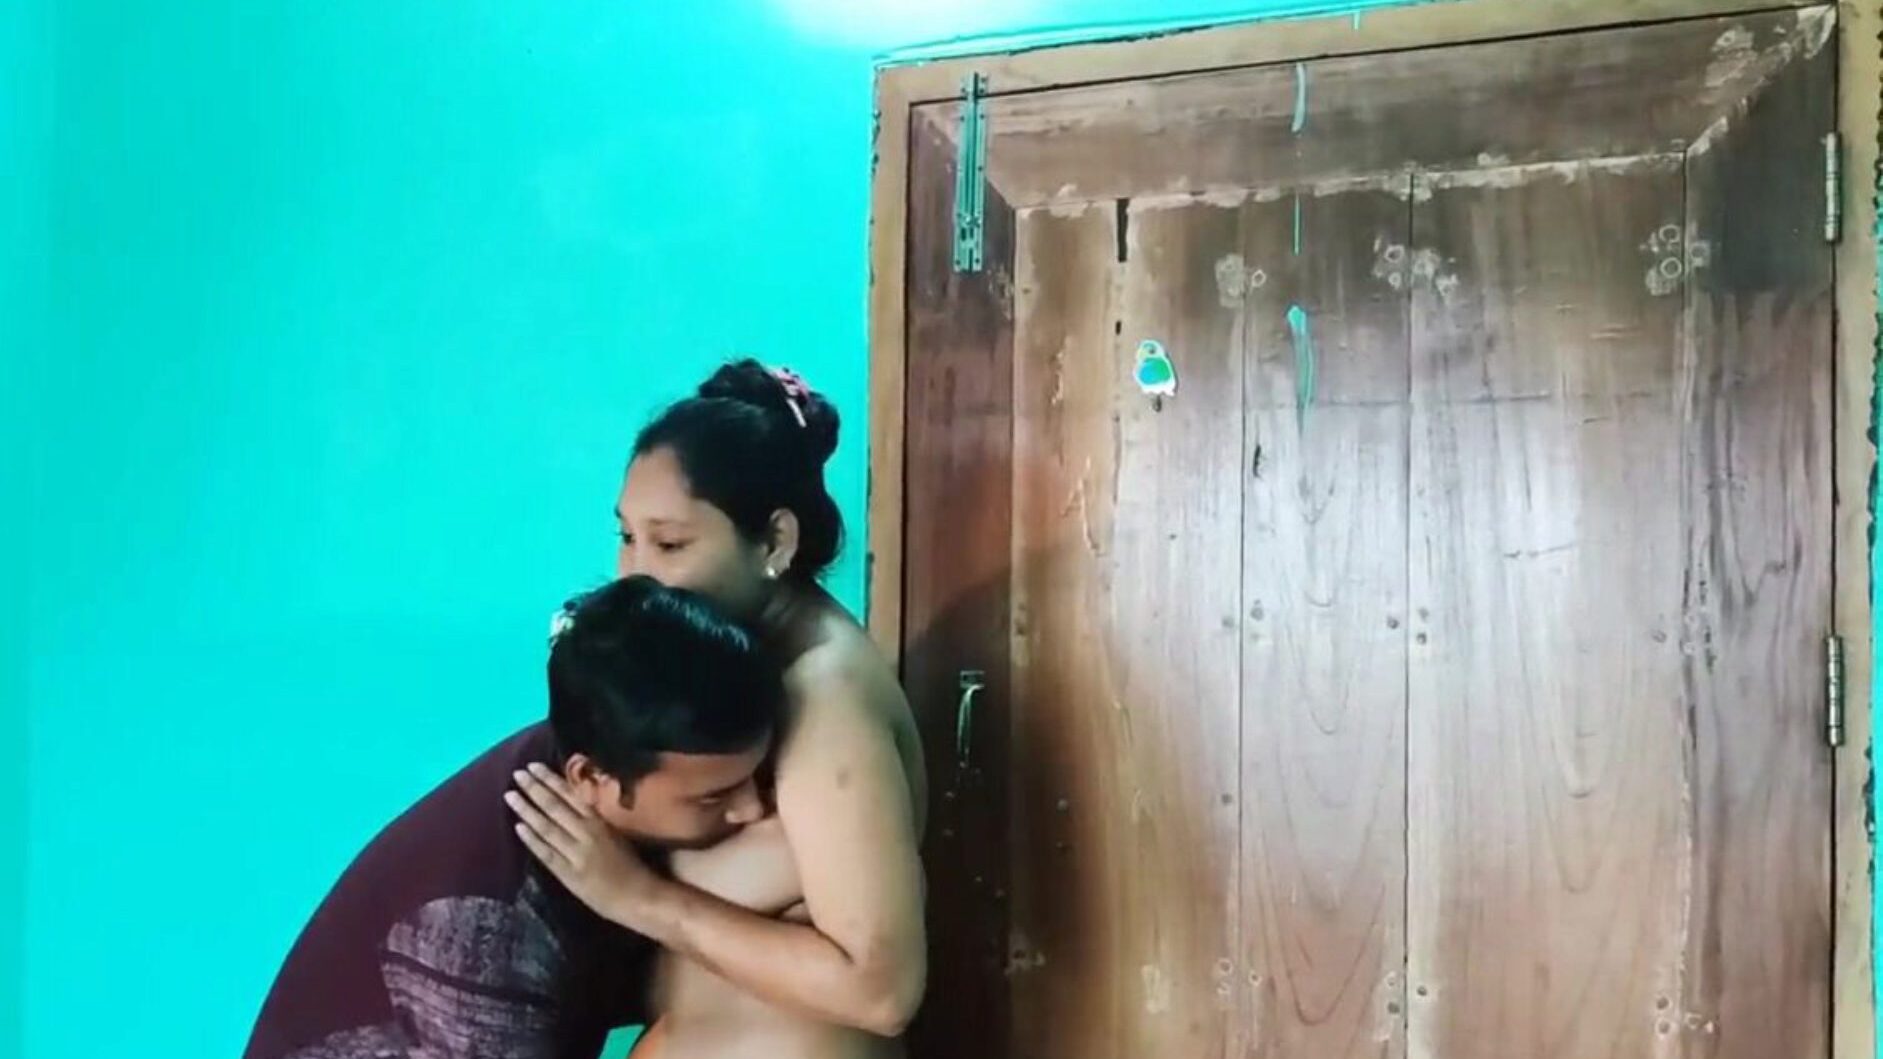 Desi Bengali Sex Video Naked, Free Asian Porn 6c: xHamster Watch Desi Bengali Sex Video Naked episode on xHamster, the fattest HD fuck-fest tube web resource with tons of free-for-all Asian Xxn Sex & Anal pornography vids